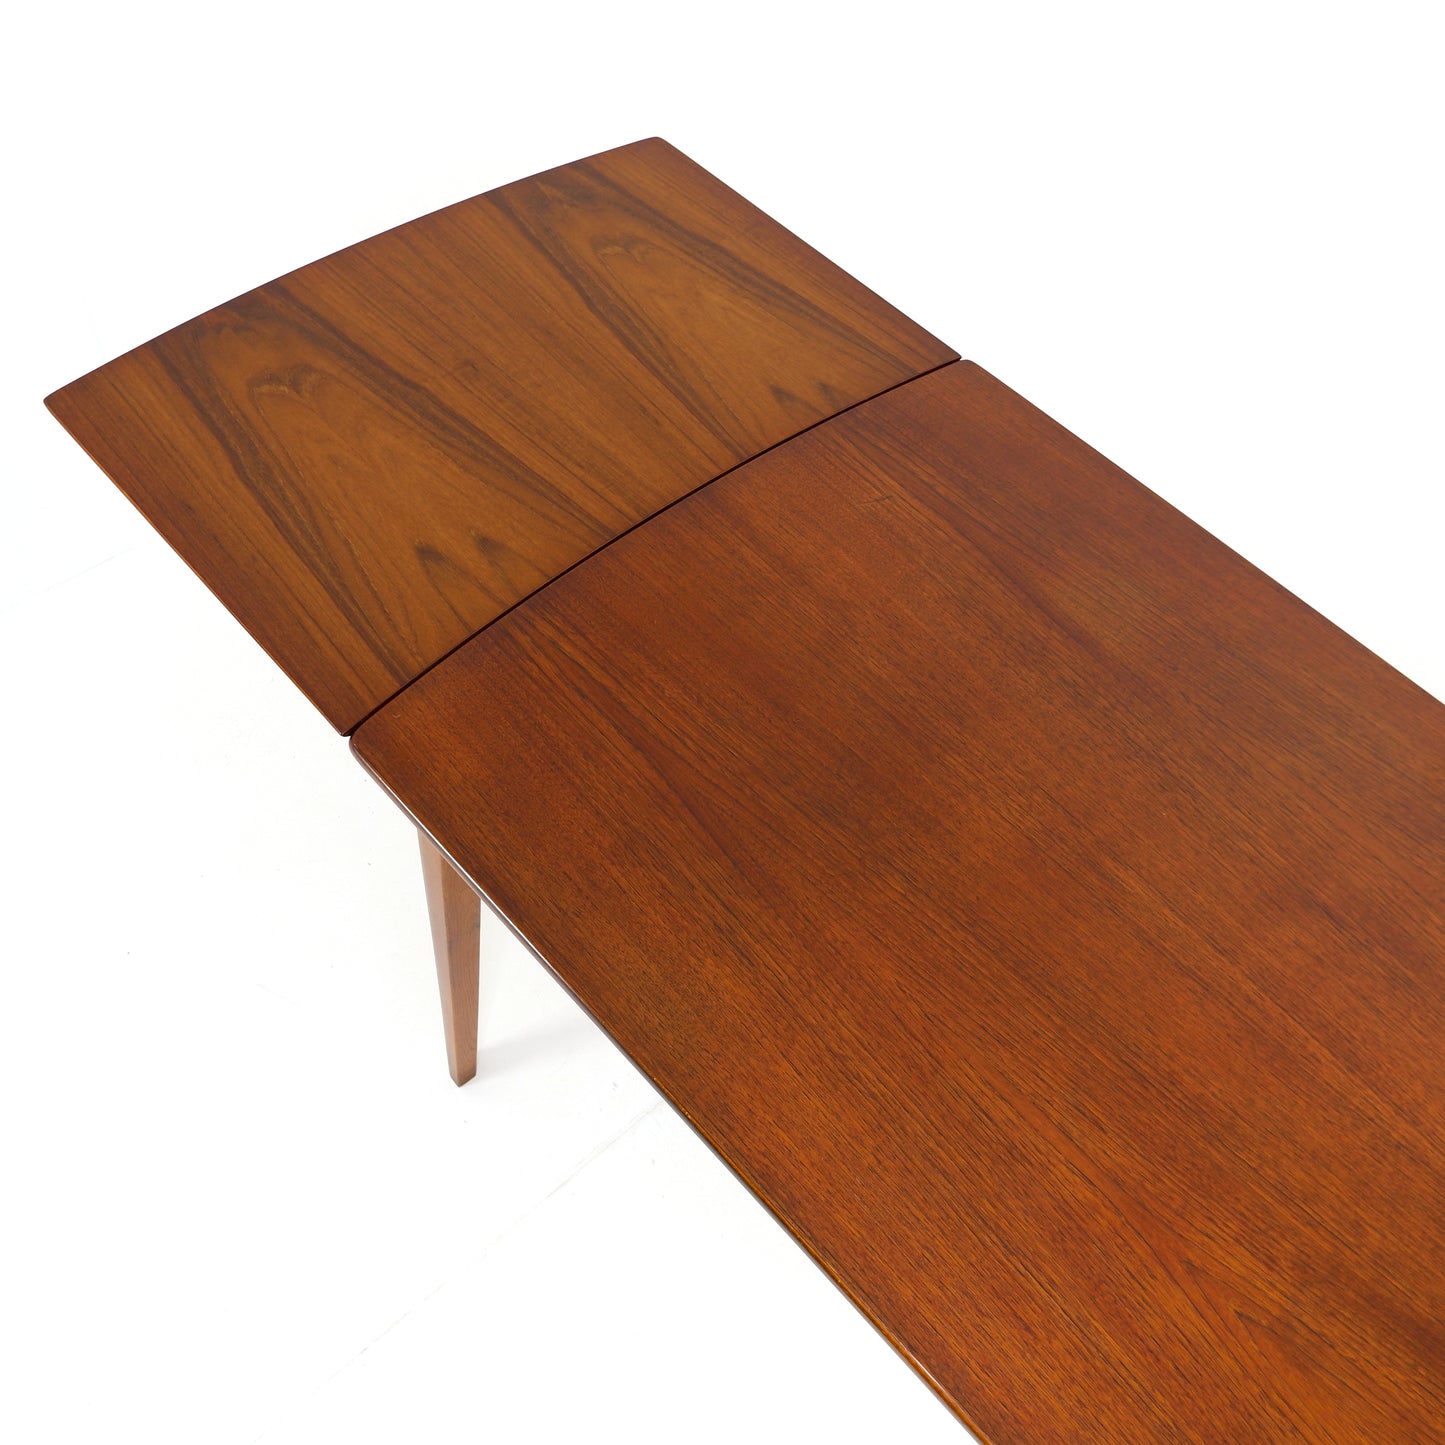 Danish Modern Dining Table and 4 Chairs by Slagelse Møbelvaerk in Teak  - Mid Century Modern